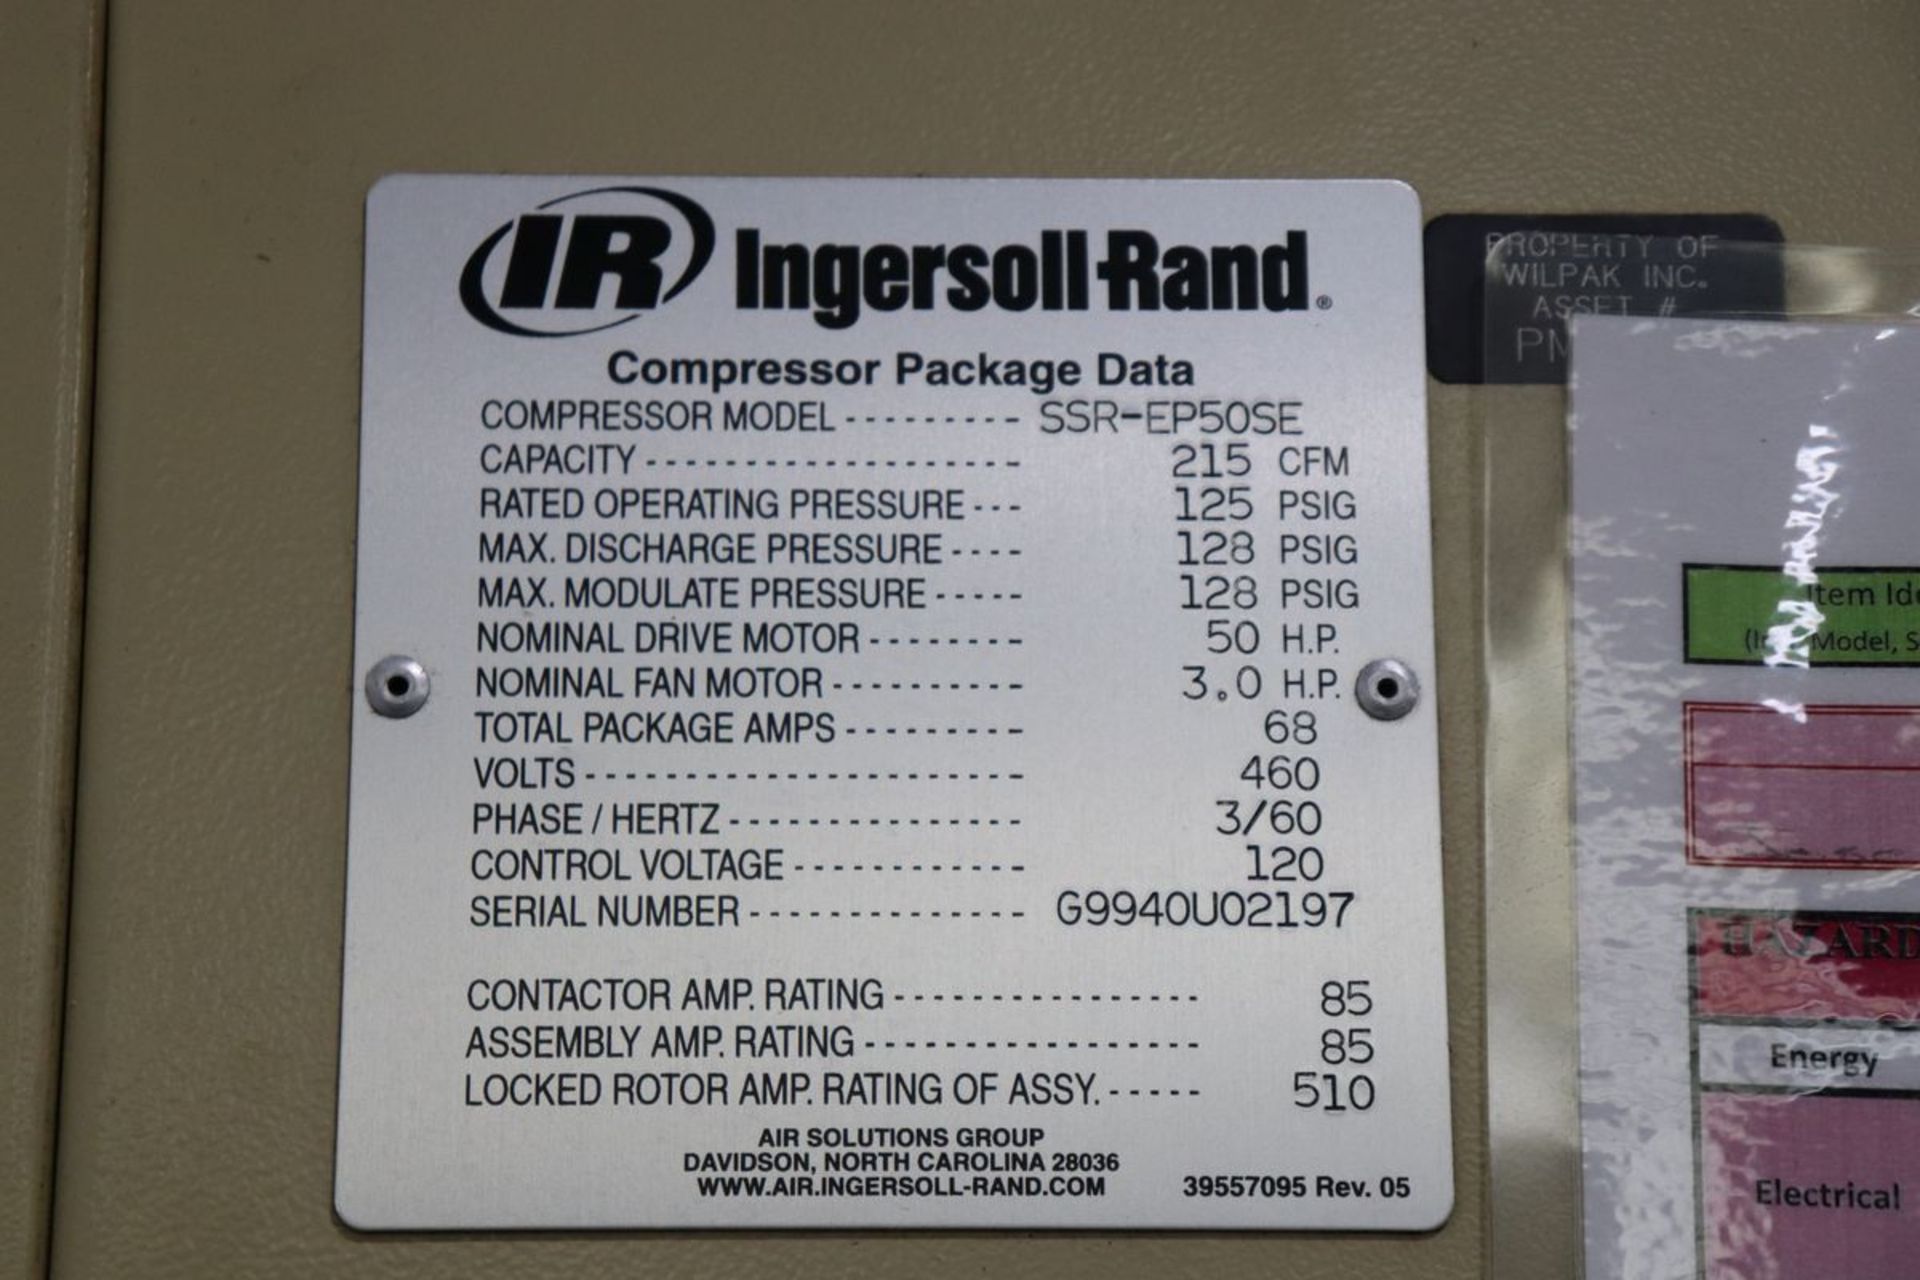 Ingersoll Rand SSR-EP50SE 50HP Rotary Screw Air Compressor - Image 8 of 12